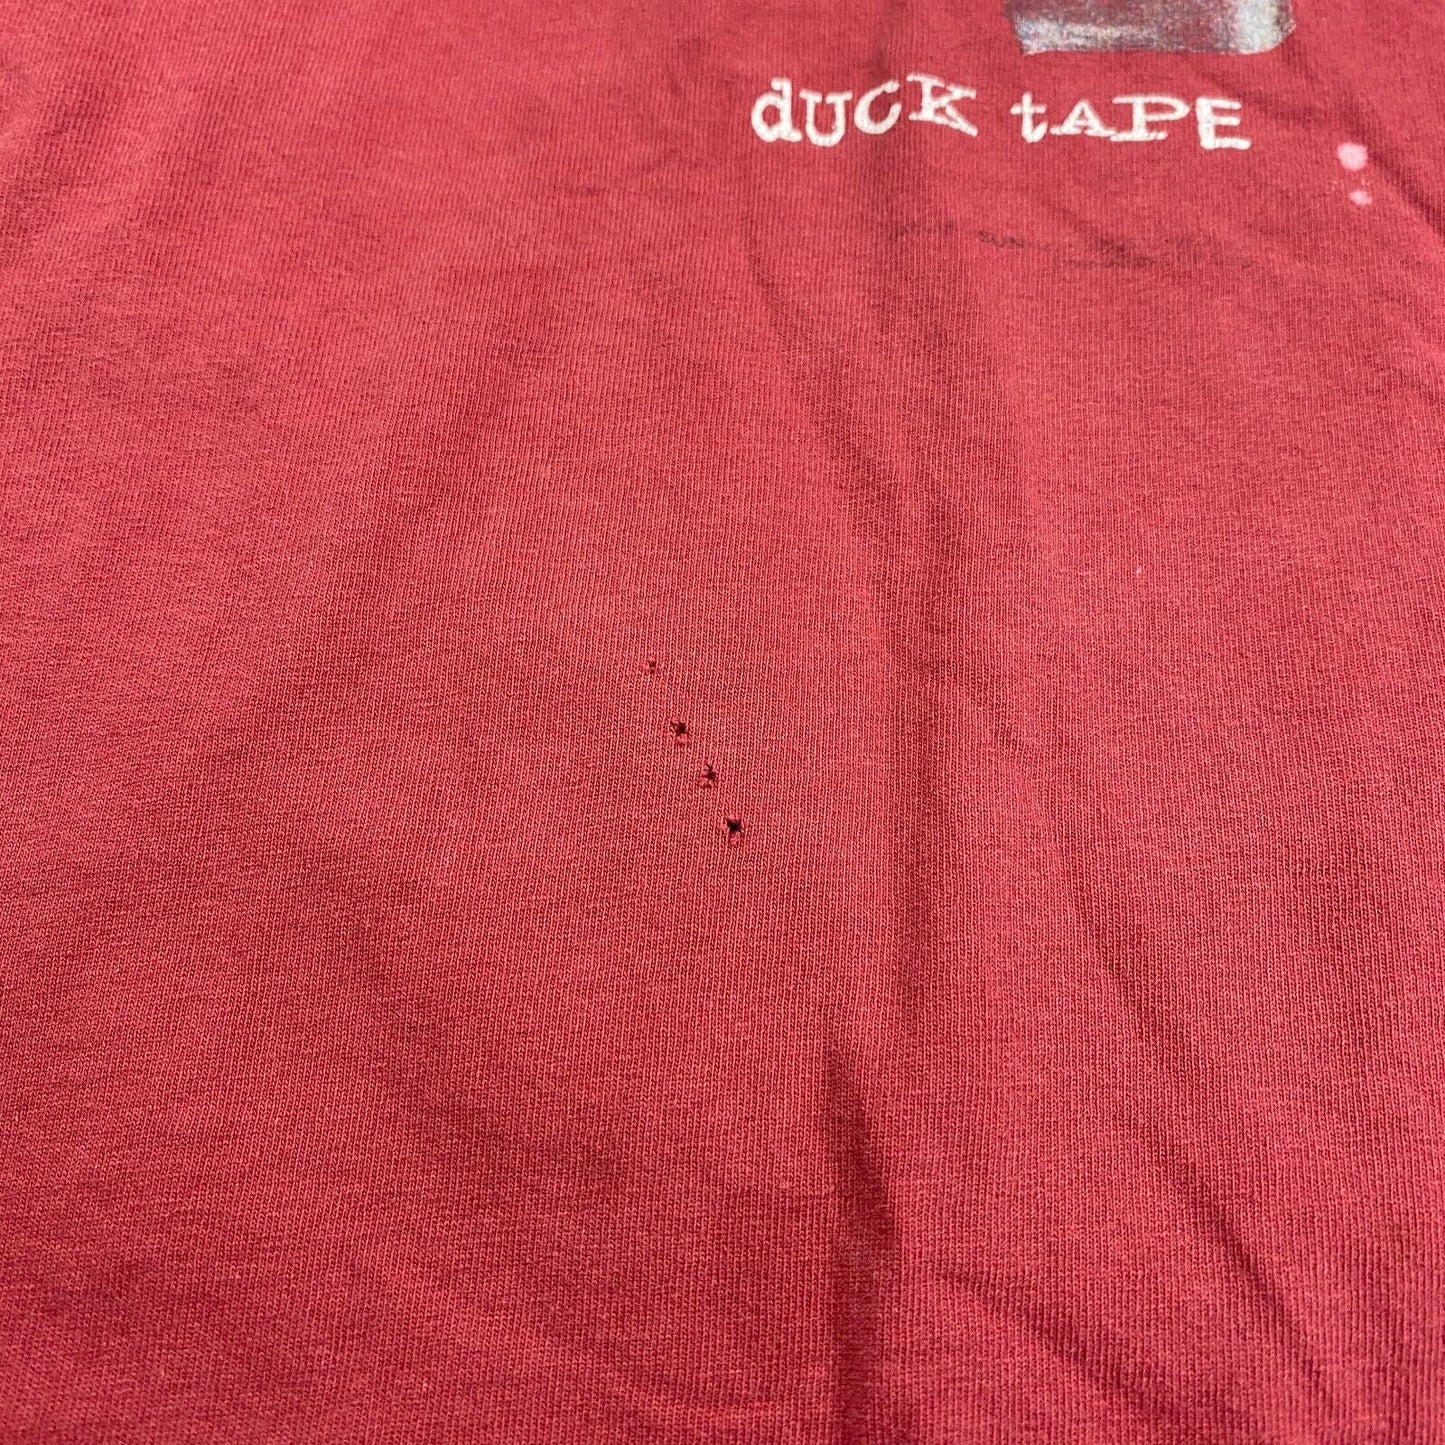 VINTAGE Duck Tape Red T-Shirt sz Large Adult